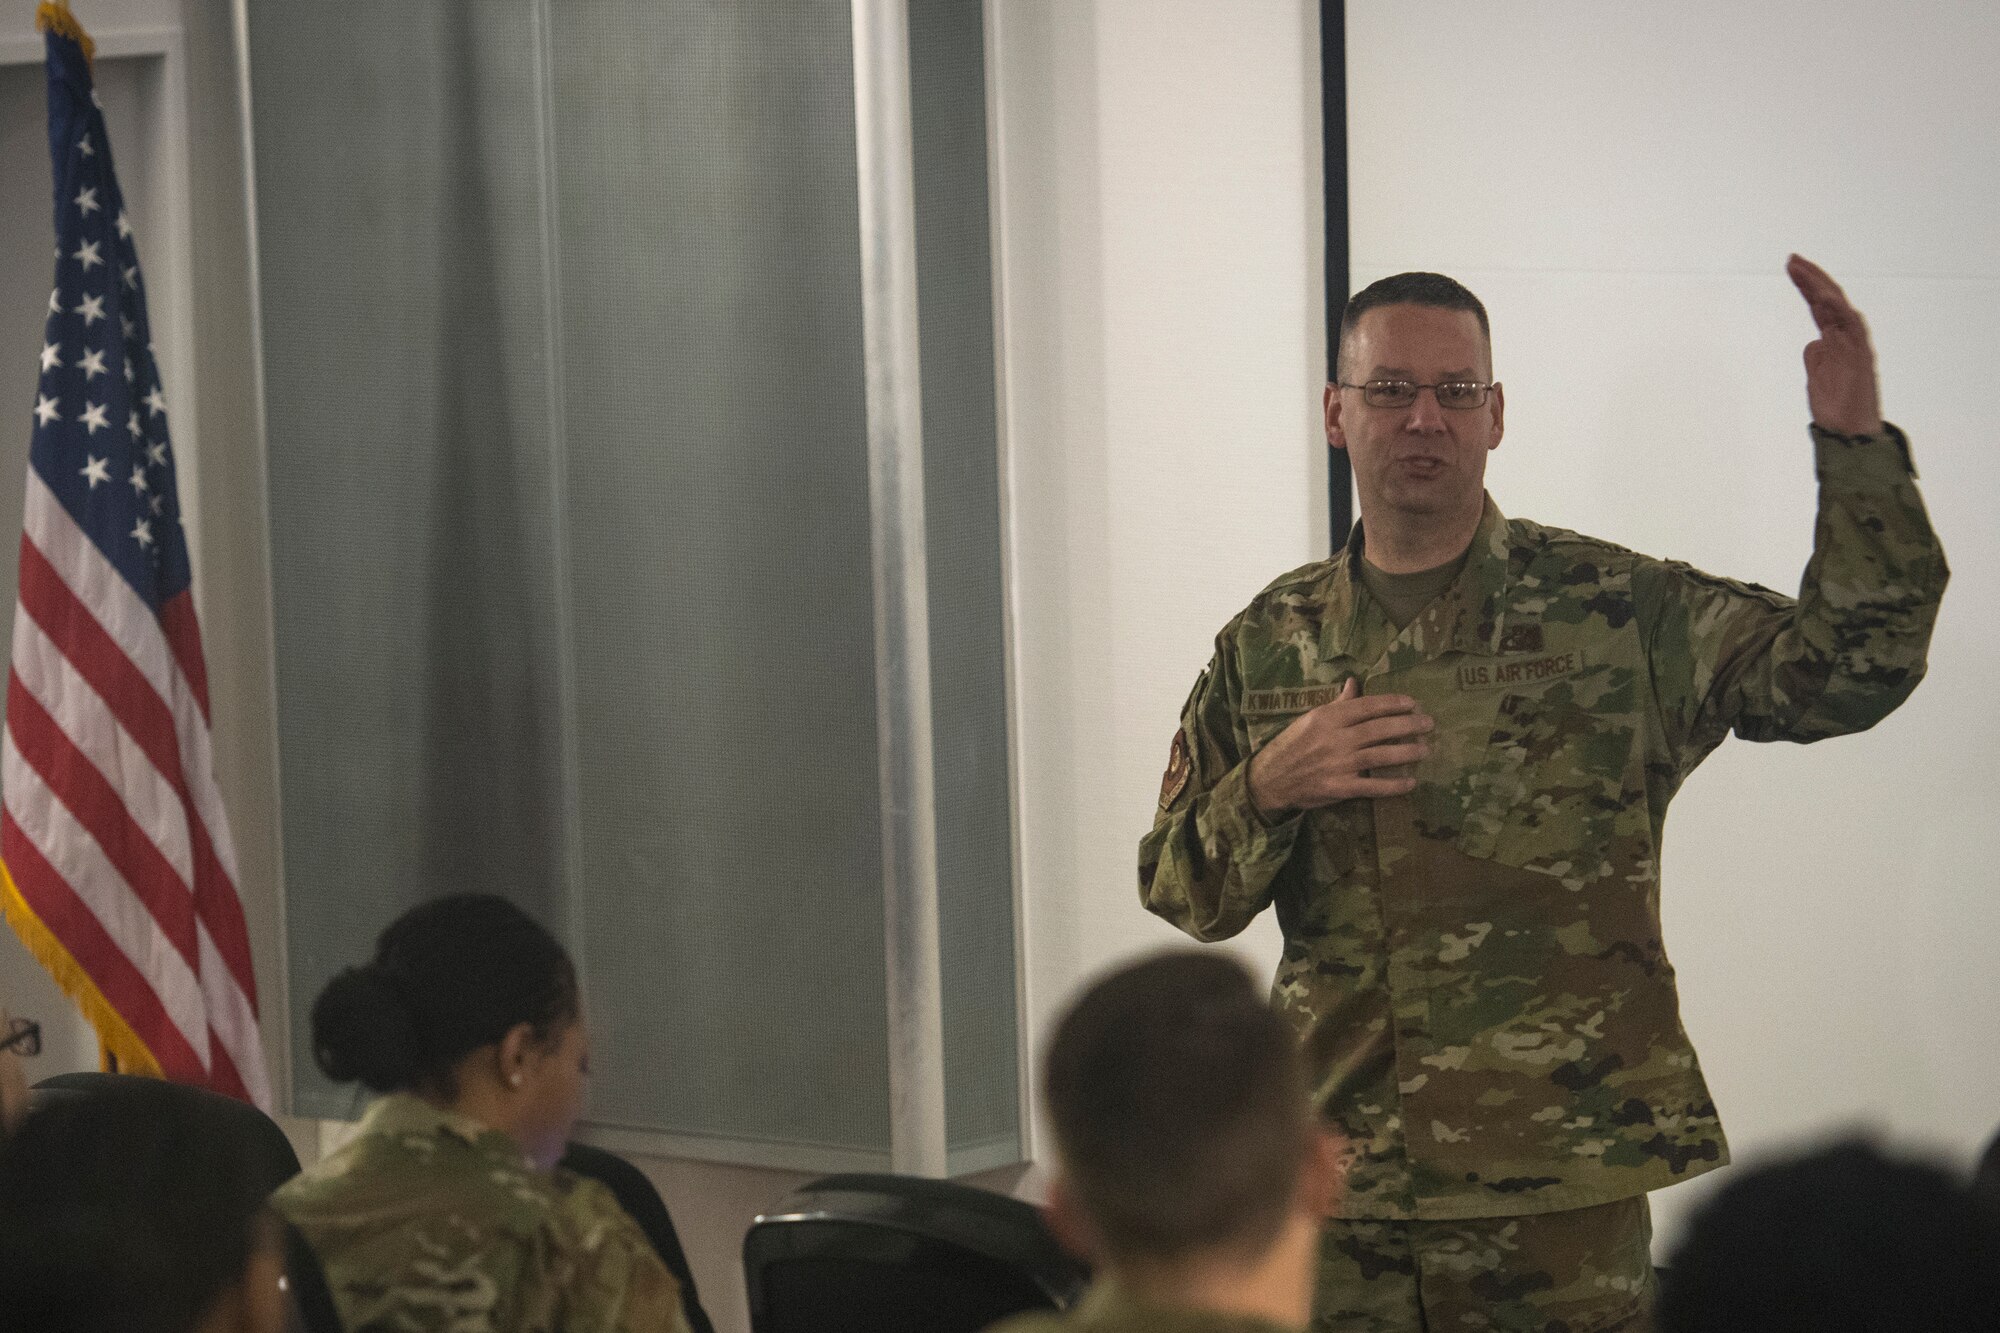 U.S. Air Force Chief Master Sgt. Randy Kwiatkowski, Third Air Force command chief, provides opening remarks for a three-day alternate dispute resolution course at the U.S. Air Force in Europe and Air Forces Africa Conference Center, Ramstein Air Base, Germany, Dec. 3, 2019.